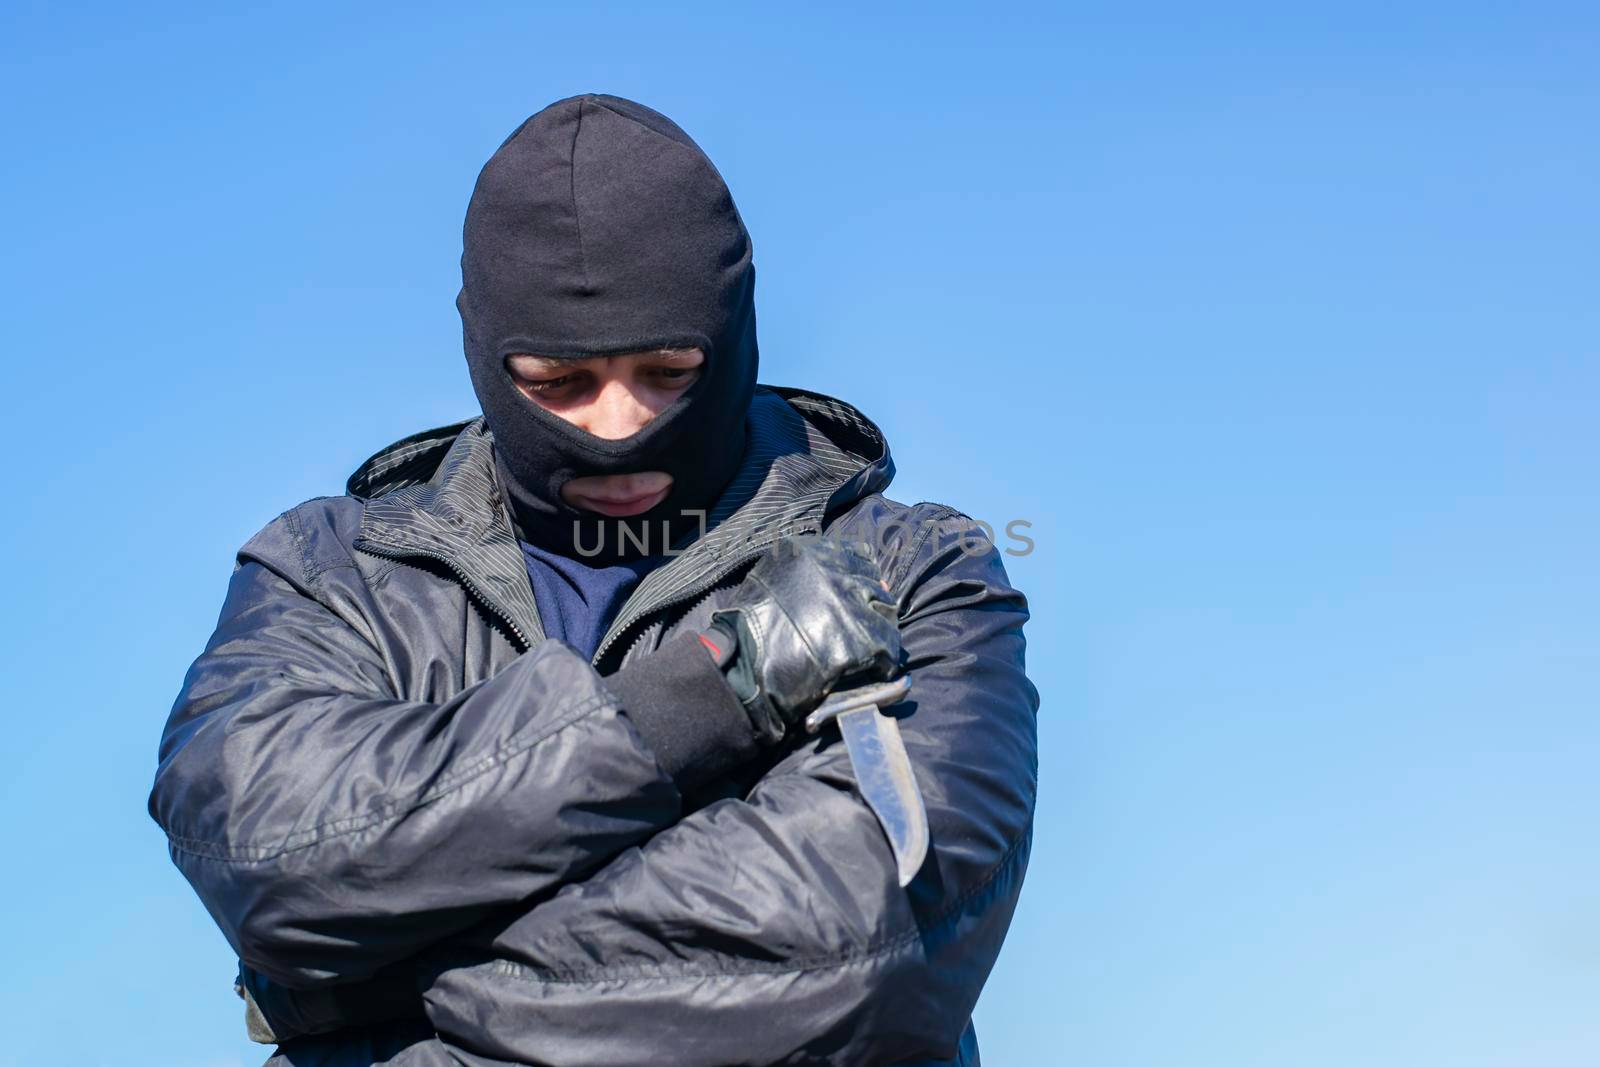 a sad, thoughtful bandit stands in a black mask and with a knife against the blue sky